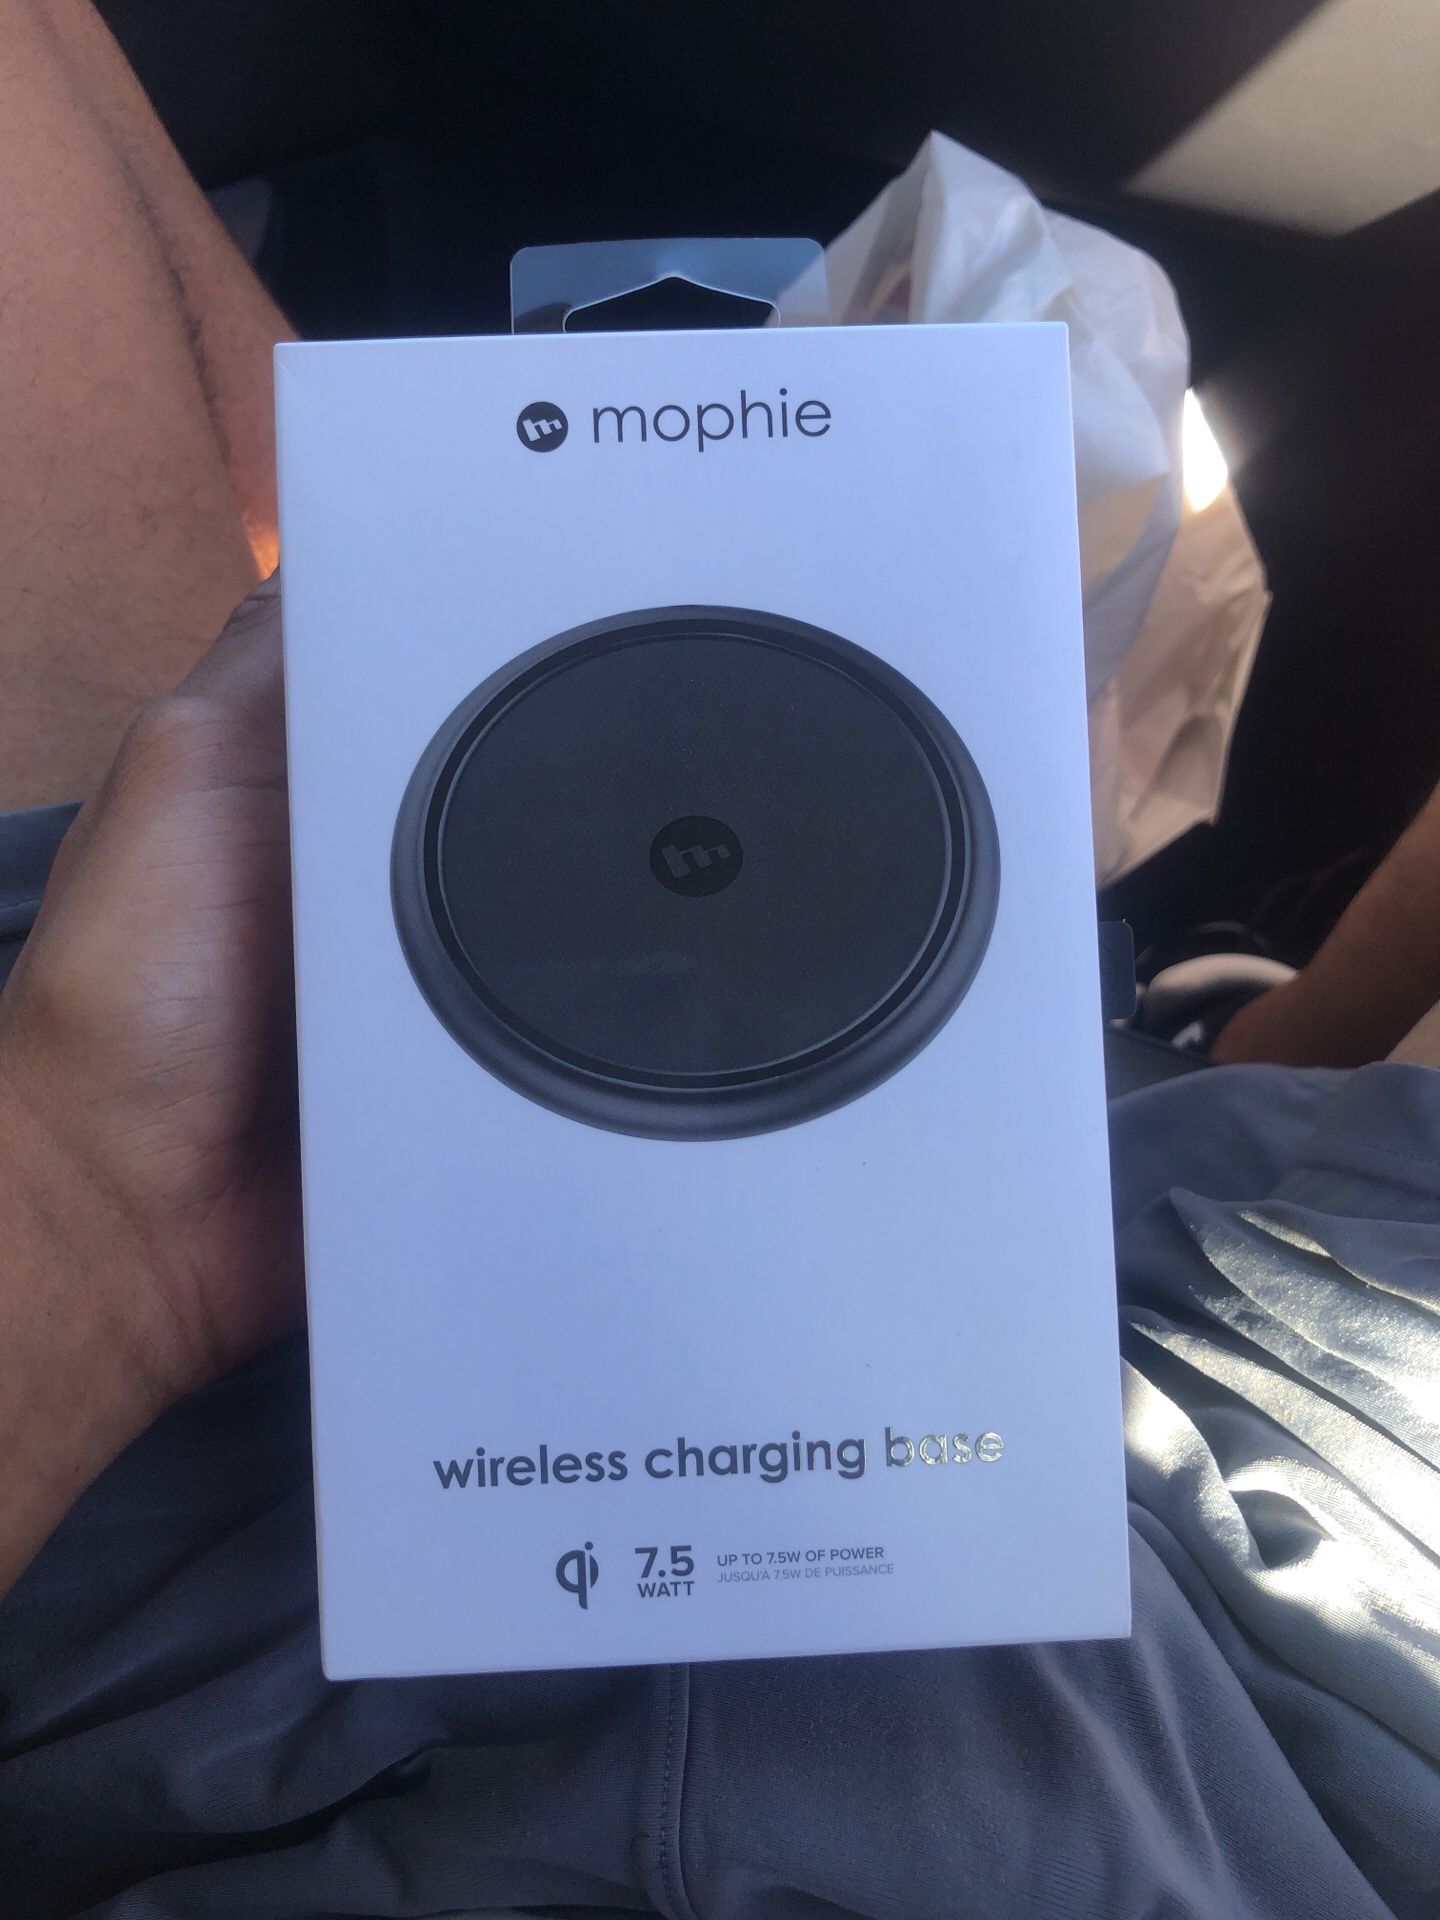 Wireless Charging Base “Mophie”